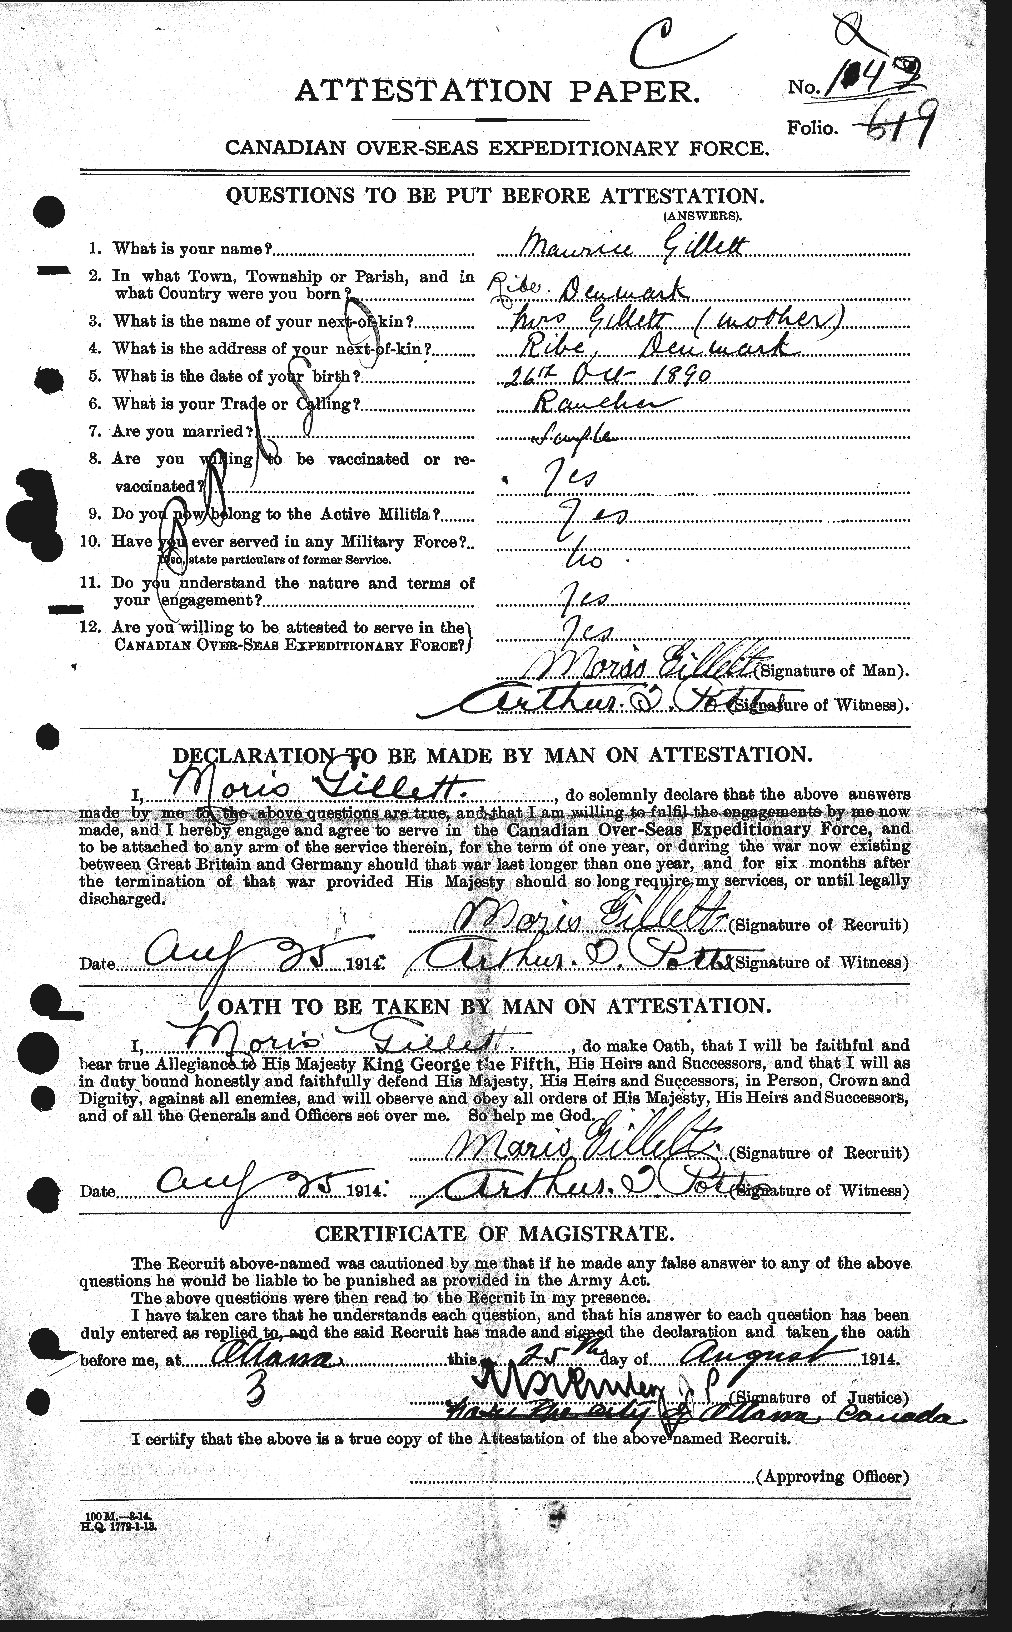 Personnel Records of the First World War - CEF 350390a